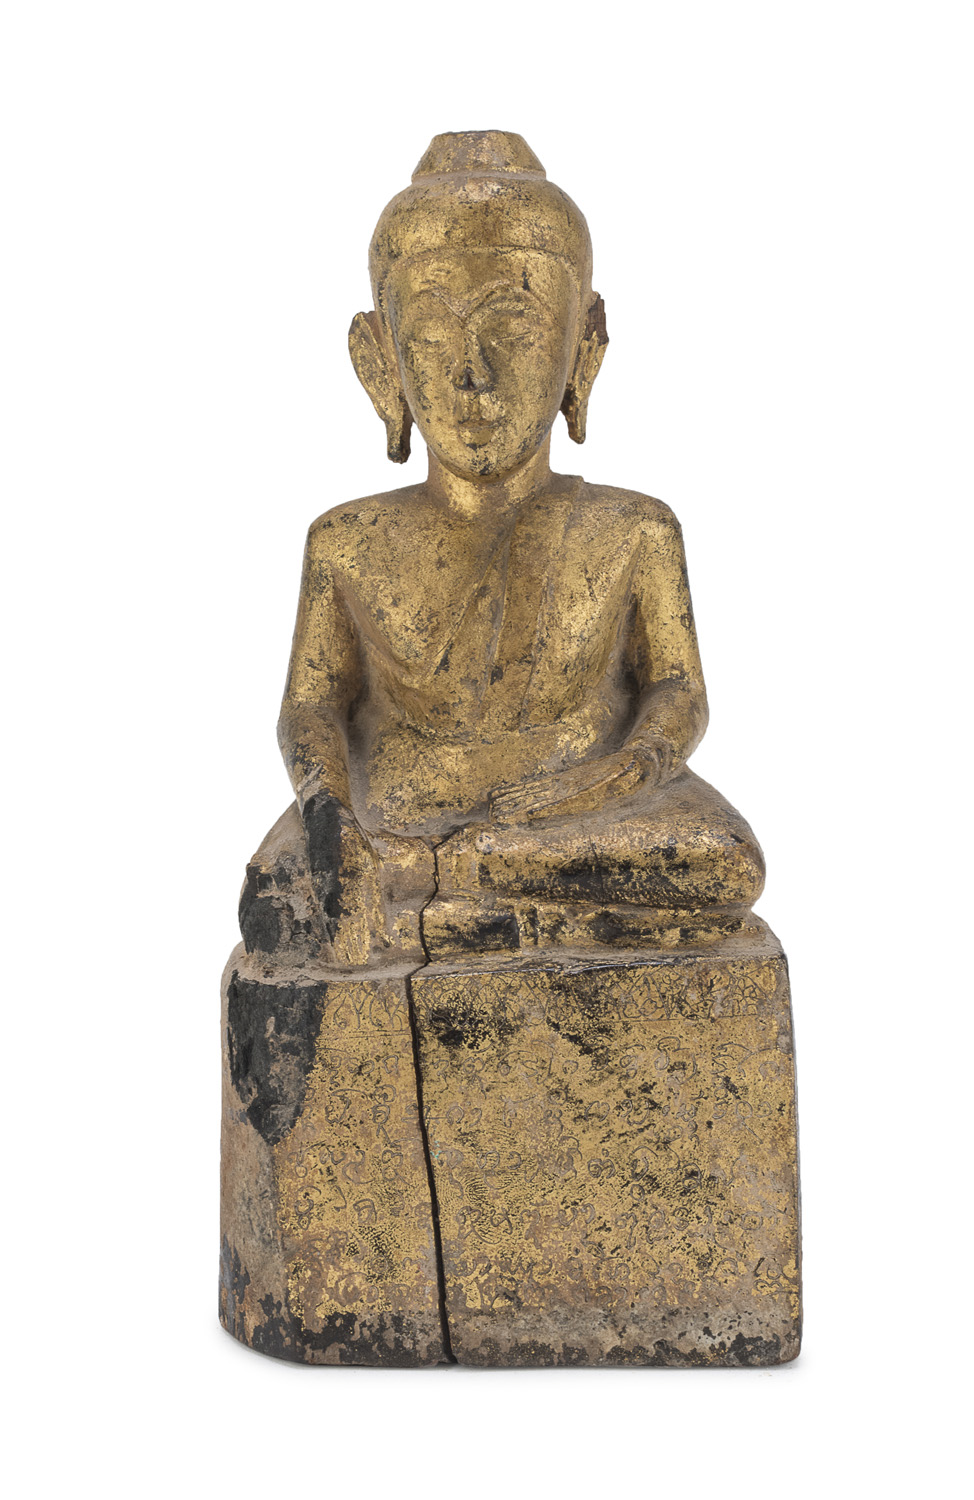 A LAOTIAN BLACK AND GOLD LAQUER WOOD SCULPTURE OF BUDDHA.